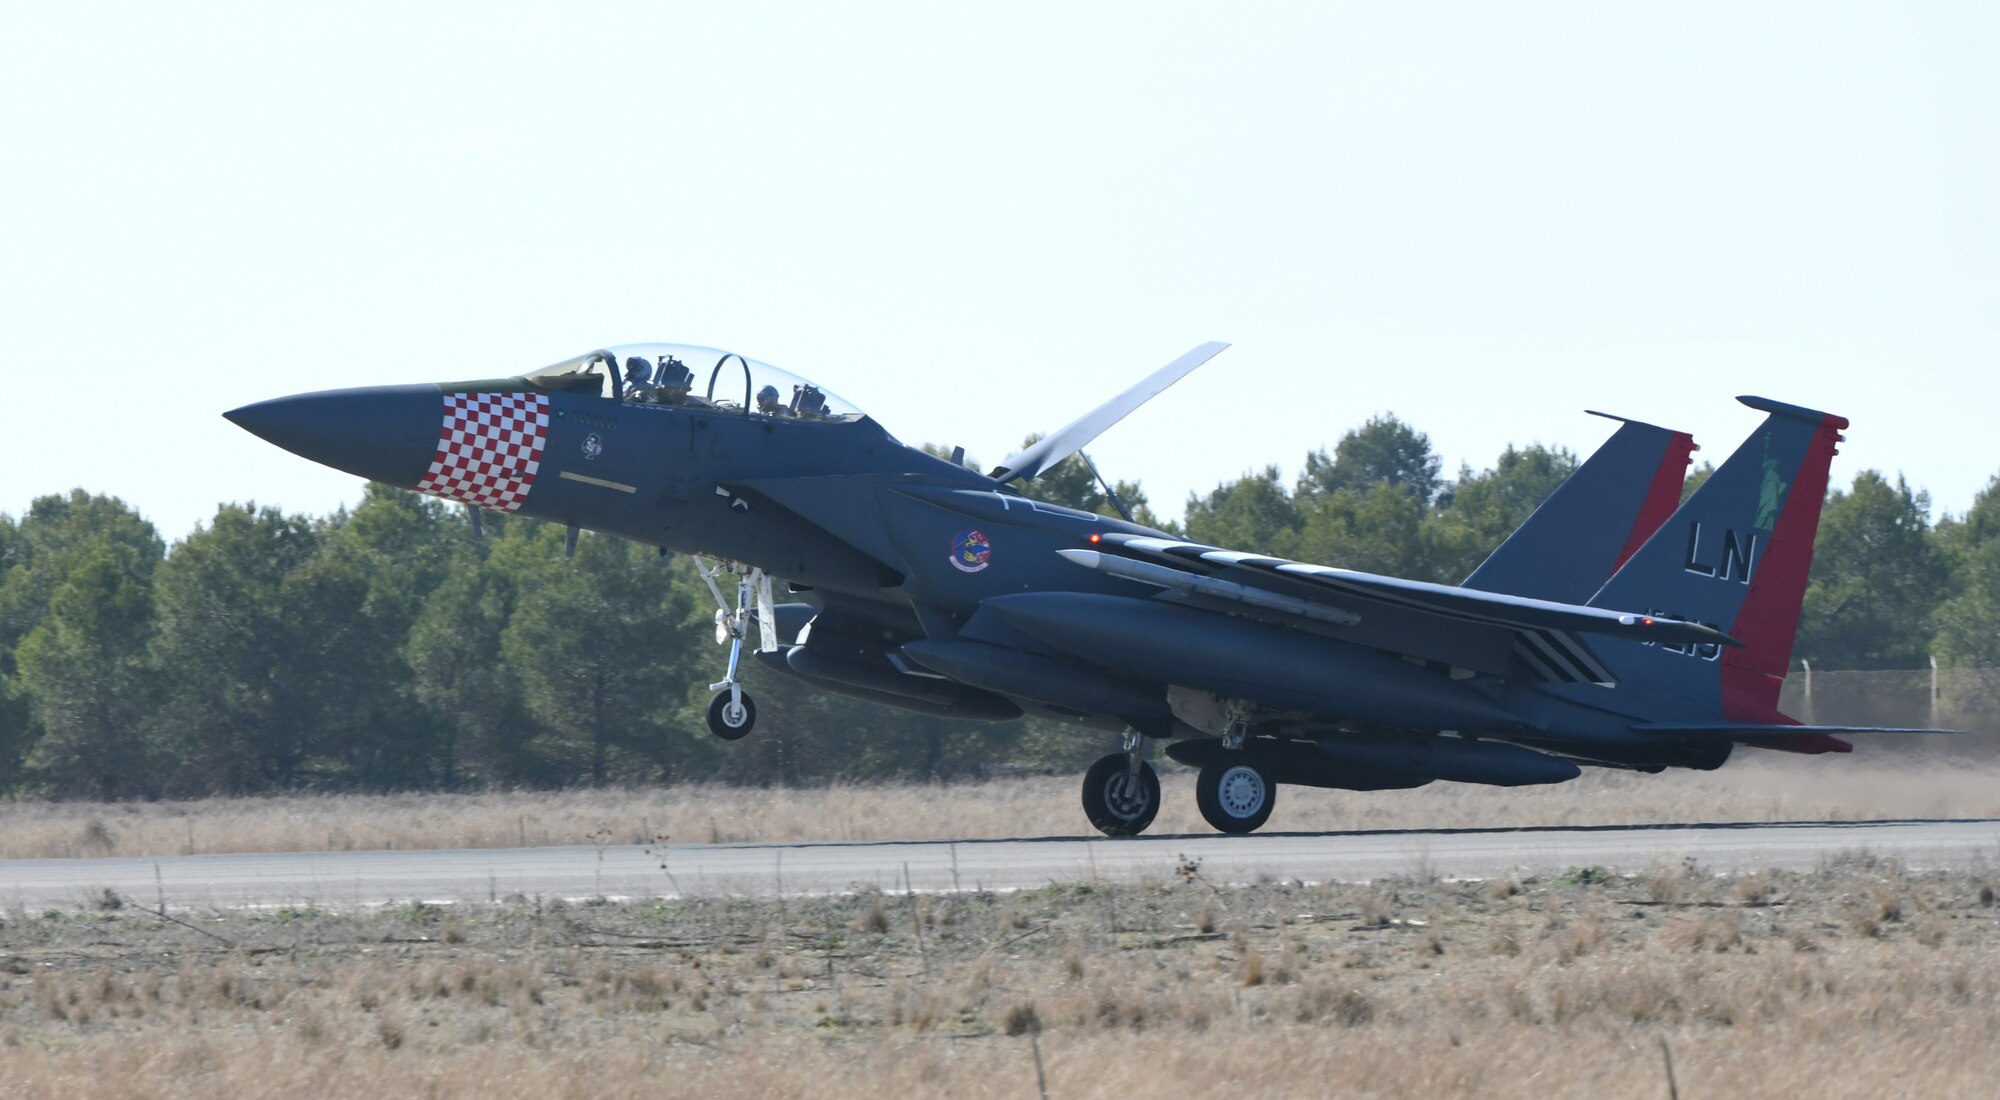 A U.S. Air Force F-15E Strike Eagle from Royal Air Force Lakenheath, England, arrives at Albacete Air Base, Spain, during the NATO Tactical Leadership Programme 19-1 flying course, Feb. 15, 2019. During TLP, U.S. Air Force F-15Es will conduct flying training with other NATO air forces including Spain, France, Greece, Italy, Germany, the United Kingdom and Belgium. (U.S. Air Force photo by Staff Sgt. Alex Fox Echols III)